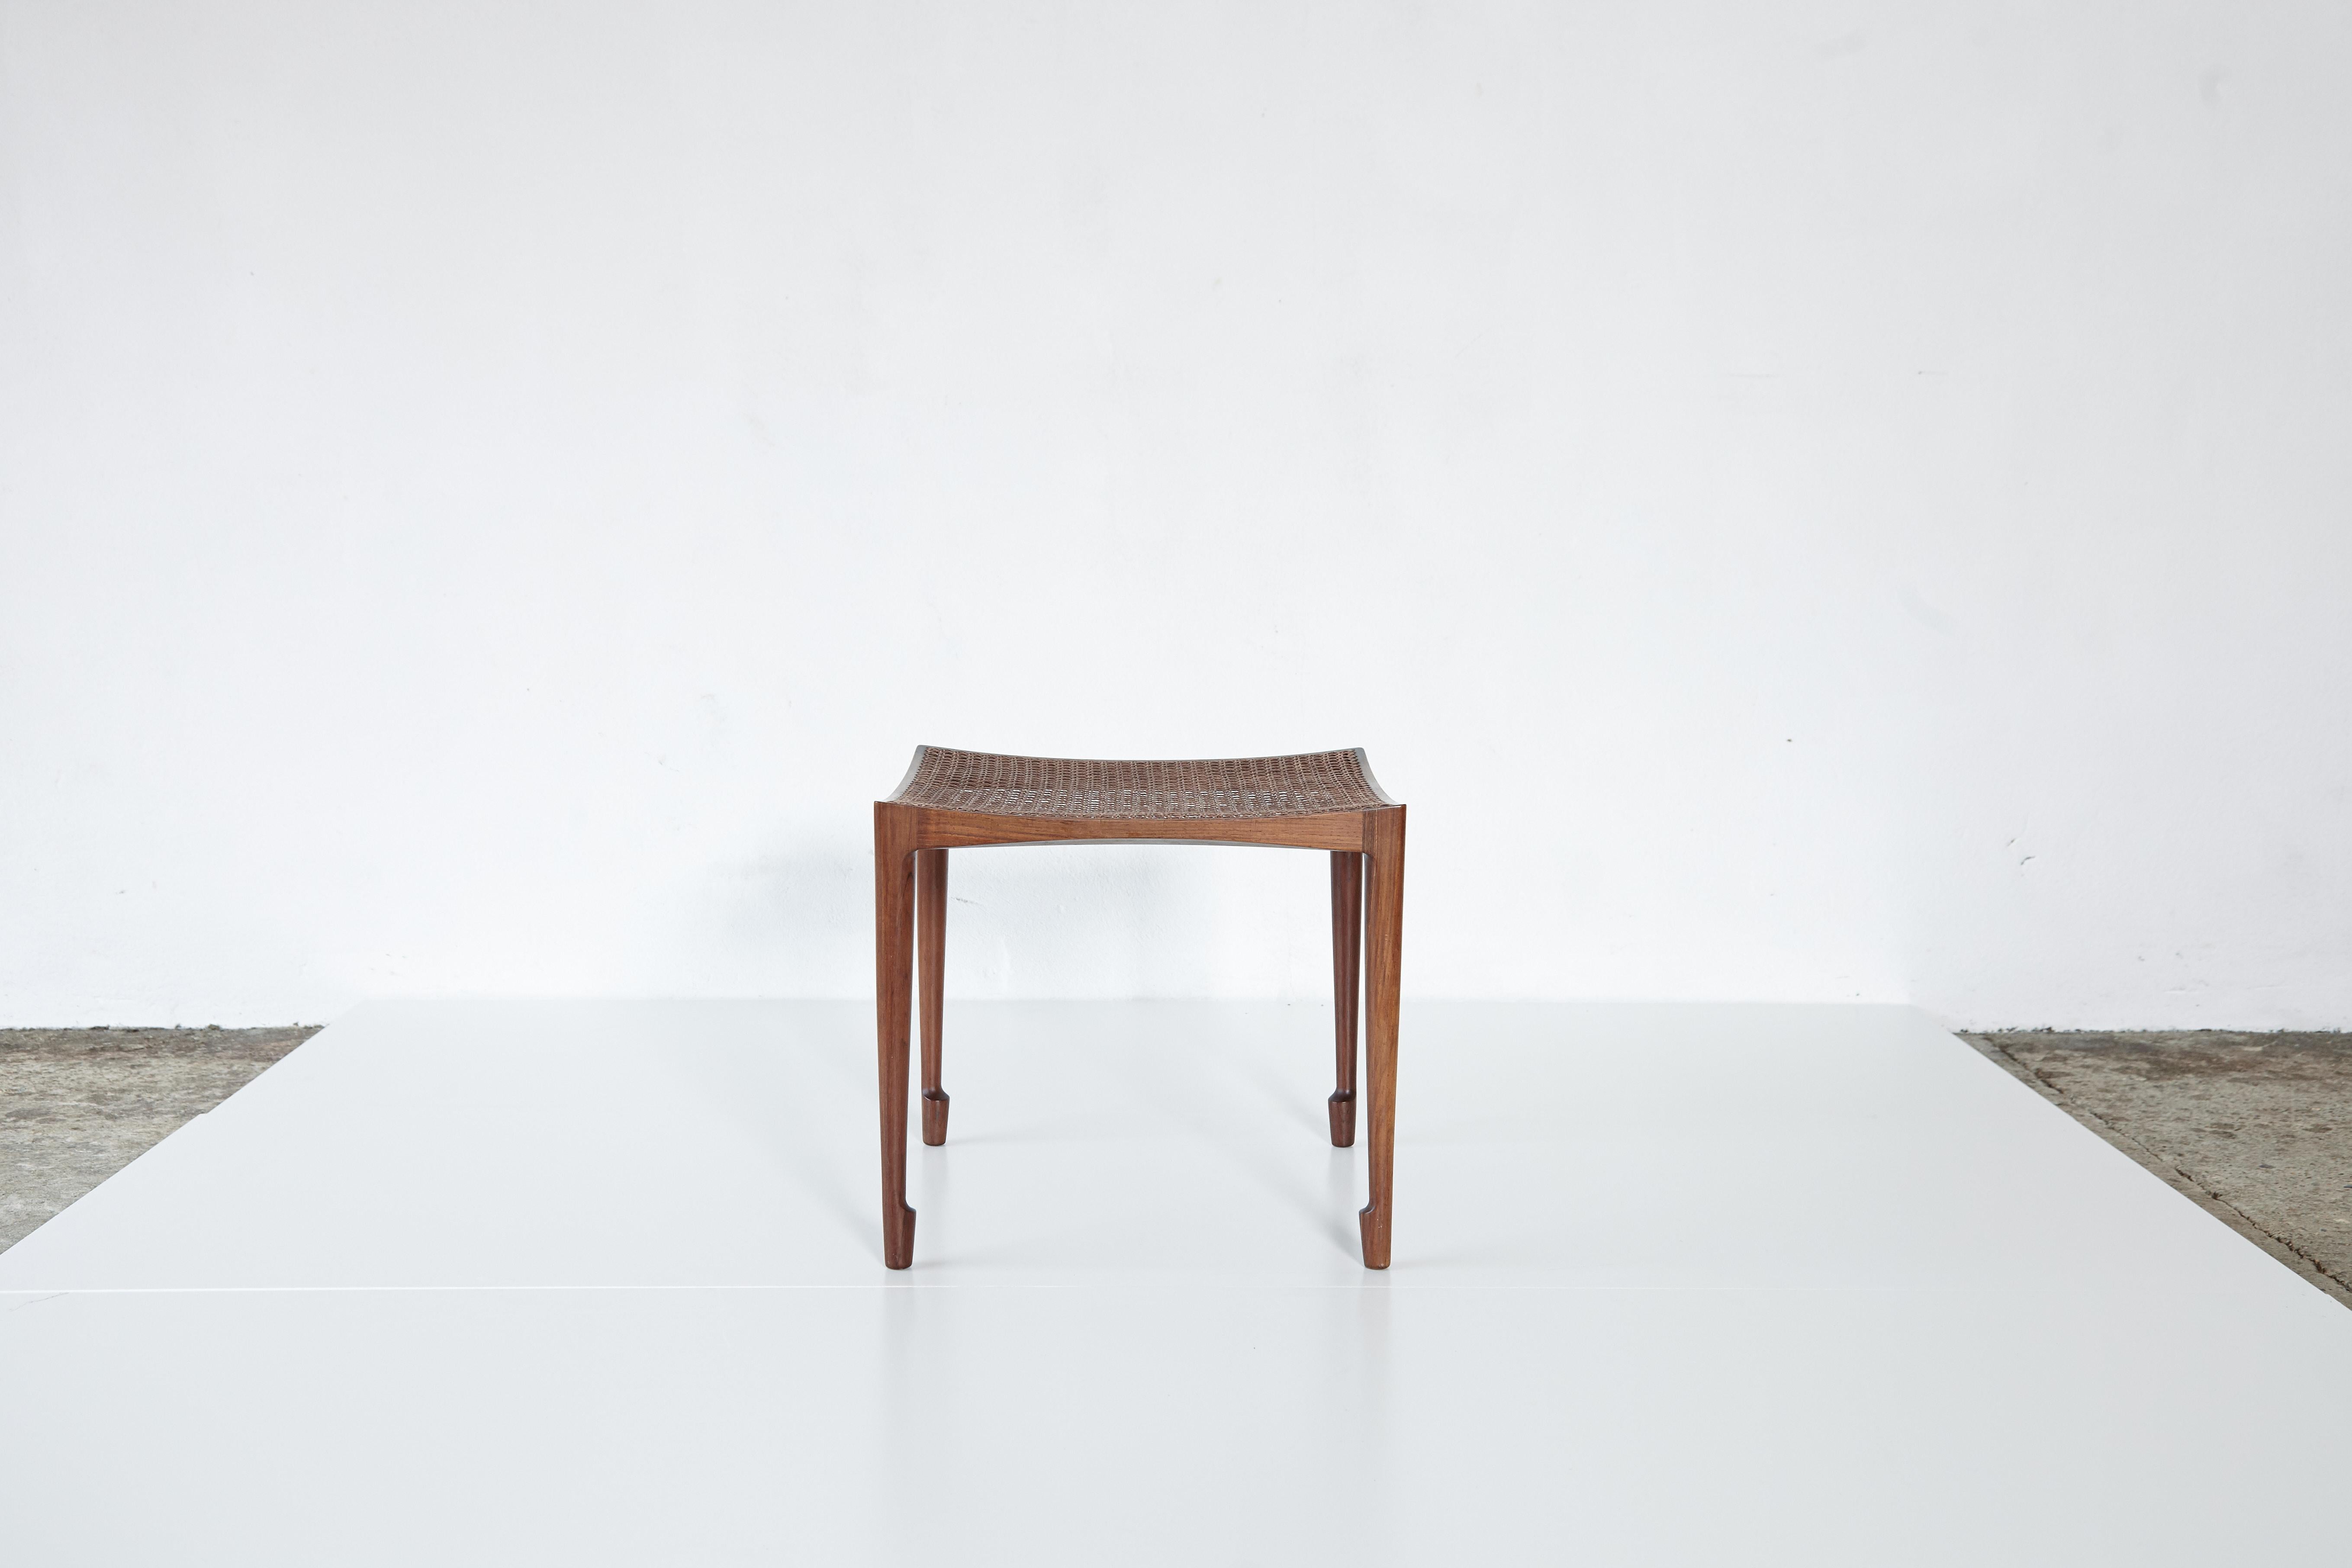 Bernt Petersen rosewood and cane stool, 1960s, Denmark. First exhibited at the cabinet makers exhibition 1958. Produced by Wørts. Ships worldwide.